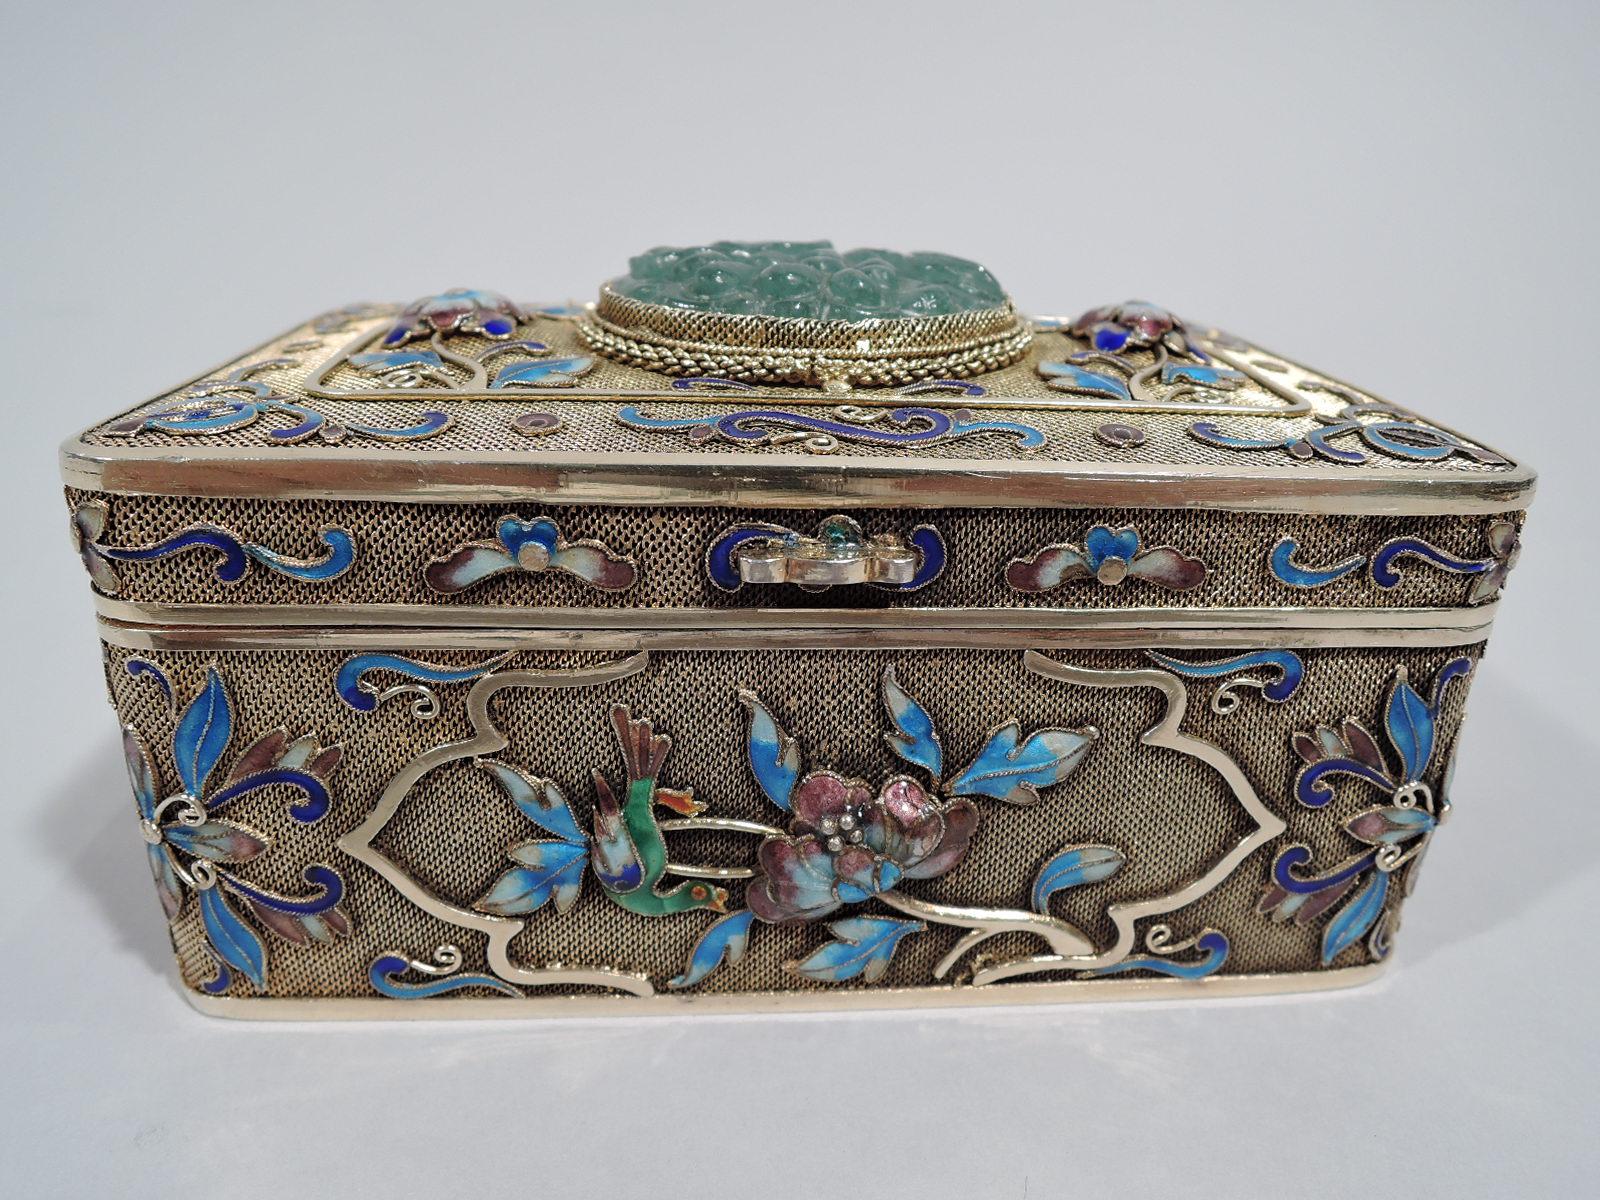 Chinese silver gilt filigree box with enamel and carved jade, ca 1910. Rectangular with curved corners and hinged cover with scrolled tab. Enamel scrolls and flowers in shades of blue, green, pink, and white applied to mesh ground. Cover has cabled